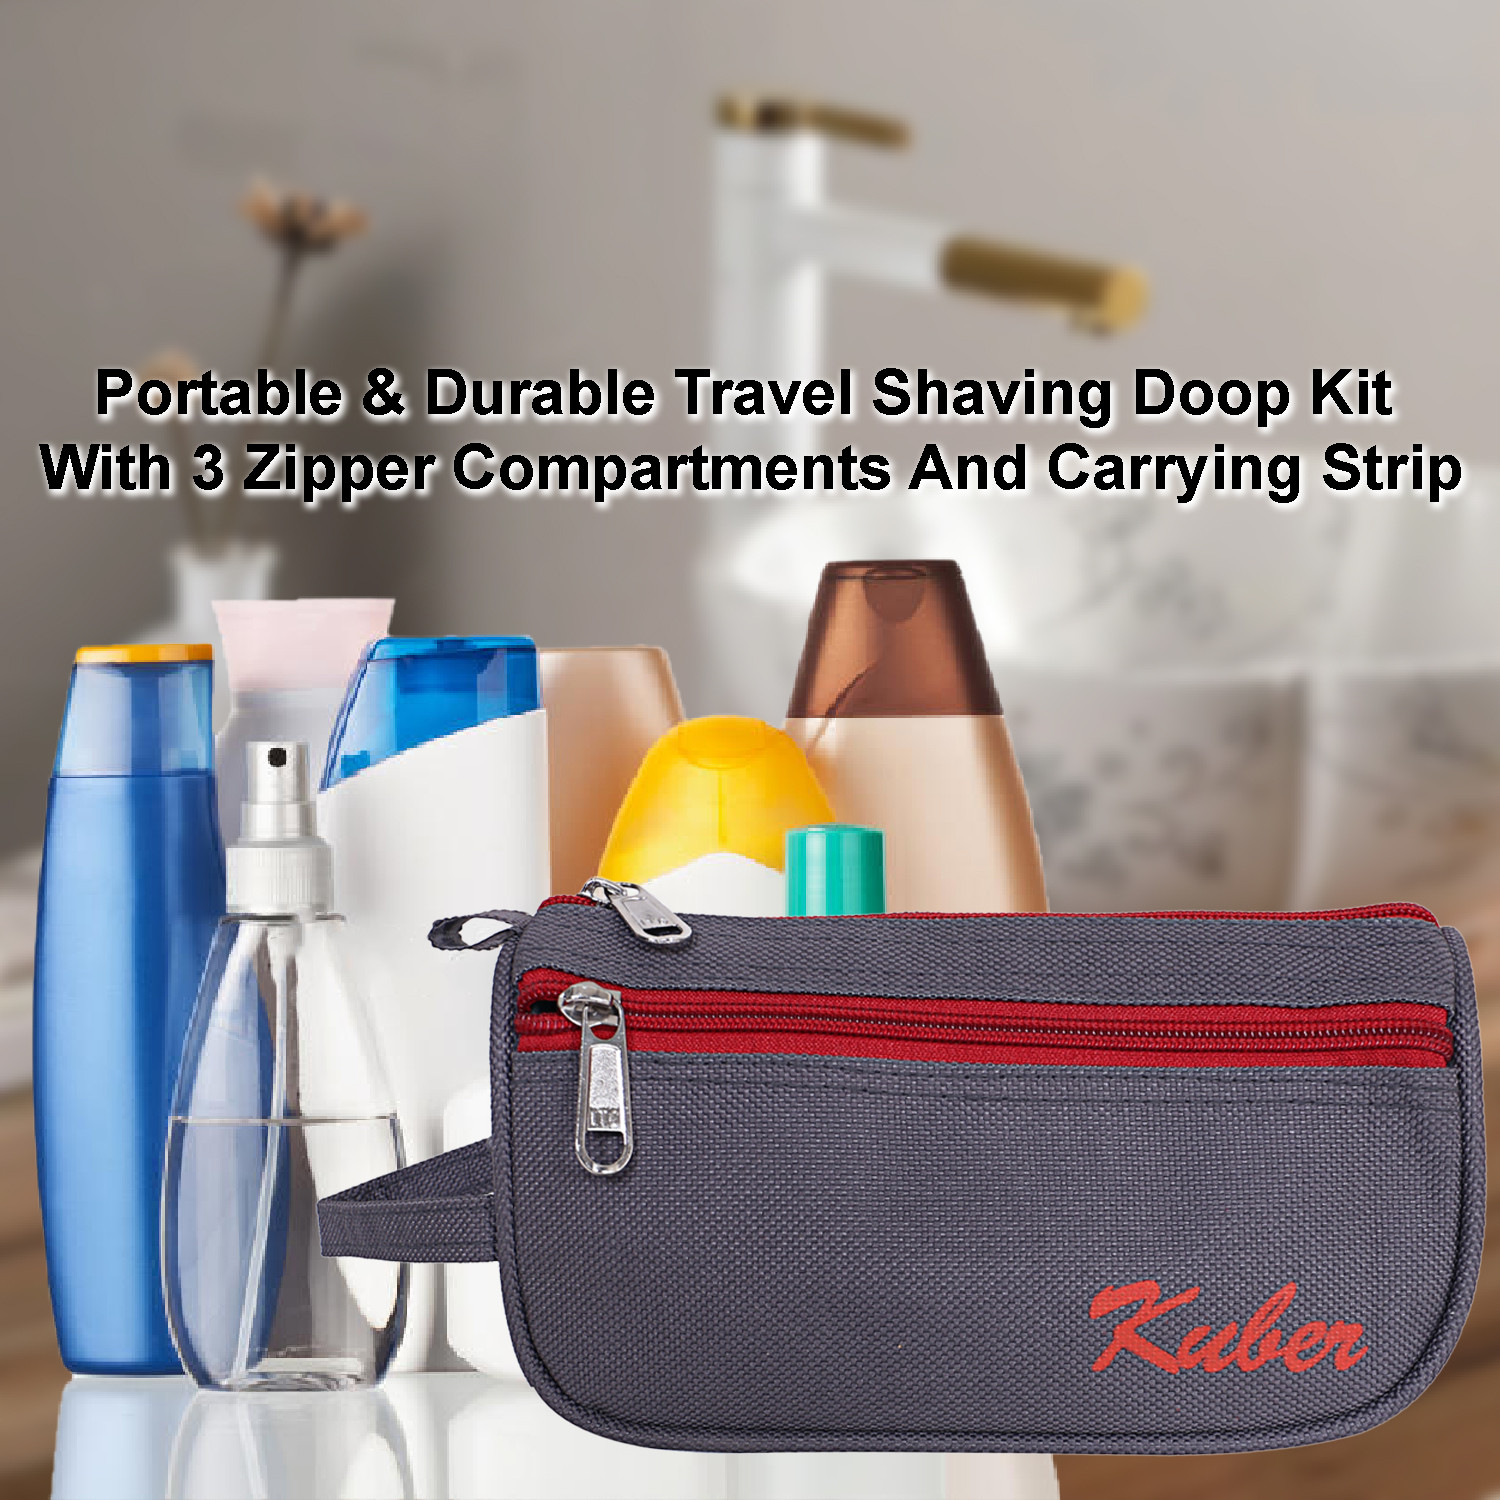 Kuber Industries Canvas Toiletry Organizer|Portable & Durable Travel Shaving Doop Kit With Fornt Zipper And Carrying Strip (Gray)